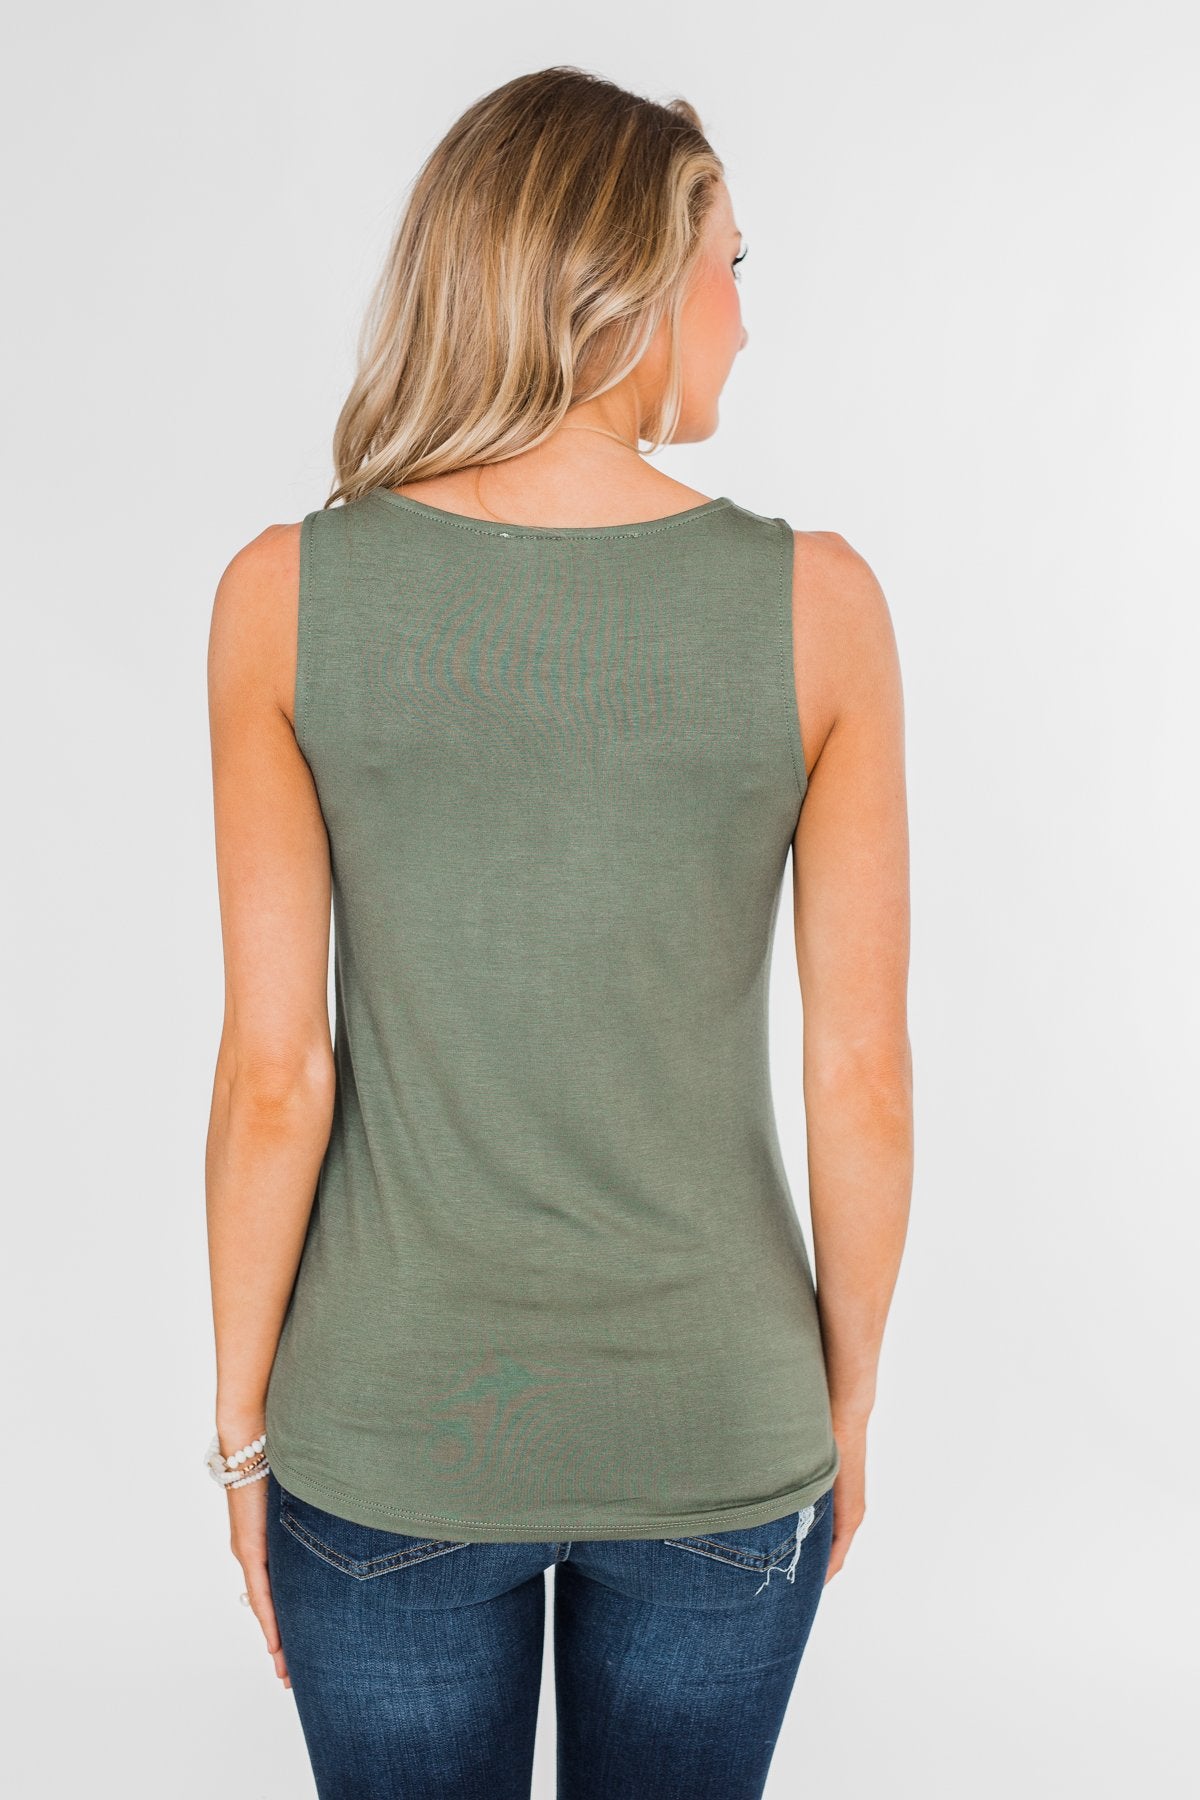 Places to Go Criss Cross Tank Top- Olive